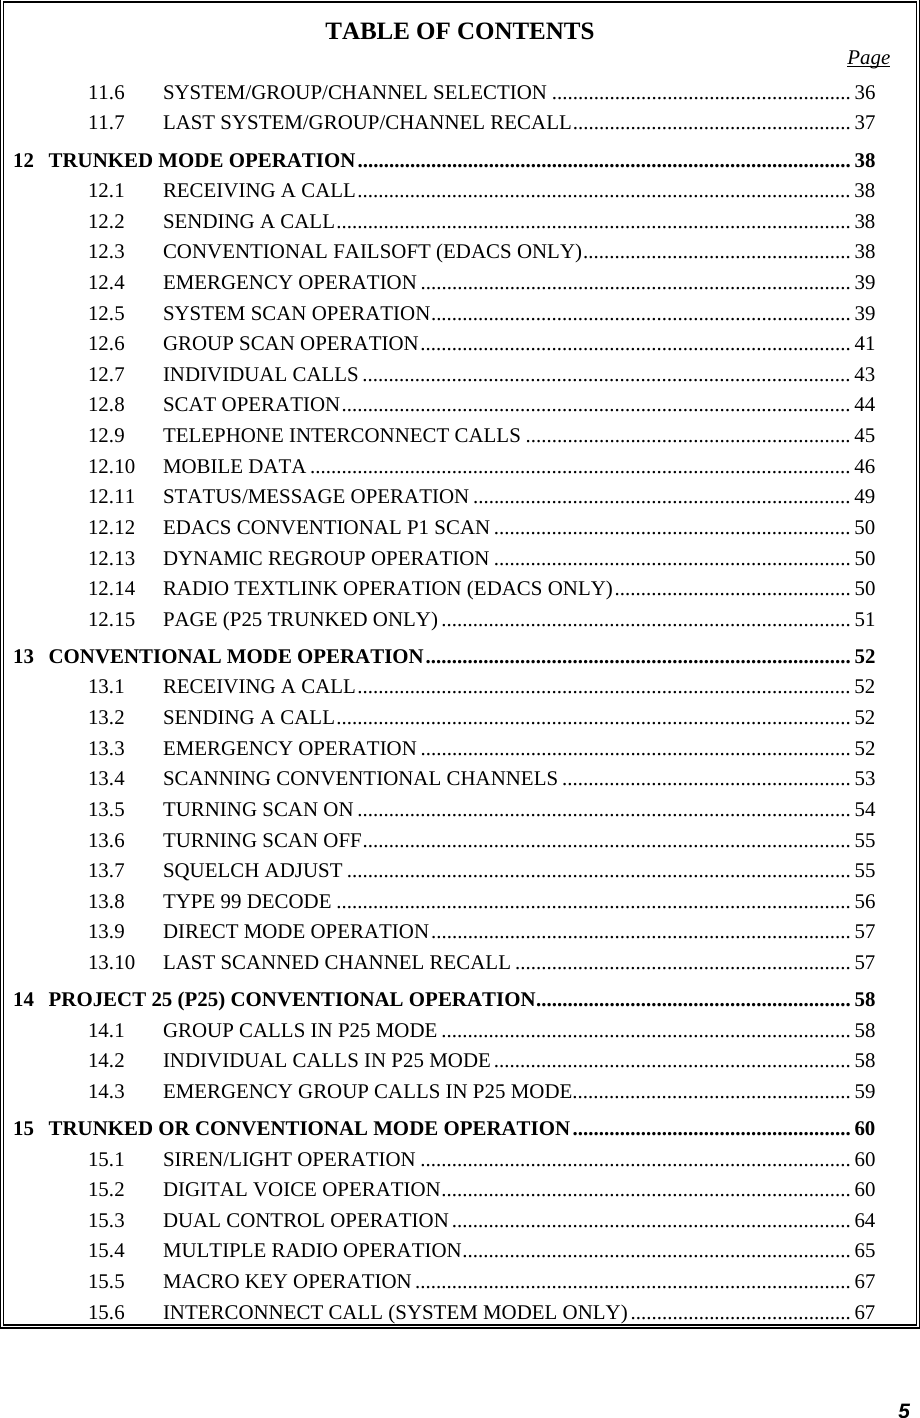 5 TABLE OF CONTENTS  Page 11.6 SYSTEM/GROUP/CHANNEL SELECTION ......................................................... 36 11.7 LAST SYSTEM/GROUP/CHANNEL RECALL..................................................... 37 12 TRUNKED MODE OPERATION.............................................................................................. 38 12.1 RECEIVING A CALL.............................................................................................. 38 12.2 SENDING A CALL.................................................................................................. 38 12.3 CONVENTIONAL FAILSOFT (EDACS ONLY)................................................... 38 12.4 EMERGENCY OPERATION .................................................................................. 39 12.5 SYSTEM SCAN OPERATION................................................................................ 39 12.6 GROUP SCAN OPERATION.................................................................................. 41 12.7 INDIVIDUAL CALLS ............................................................................................. 43 12.8 SCAT OPERATION................................................................................................. 44 12.9 TELEPHONE INTERCONNECT CALLS ..............................................................45 12.10 MOBILE DATA ....................................................................................................... 46 12.11 STATUS/MESSAGE OPERATION ........................................................................ 49 12.12 EDACS CONVENTIONAL P1 SCAN .................................................................... 50 12.13 DYNAMIC REGROUP OPERATION .................................................................... 50 12.14 RADIO TEXTLINK OPERATION (EDACS ONLY)............................................. 50 12.15 PAGE (P25 TRUNKED ONLY).............................................................................. 51 13 CONVENTIONAL MODE OPERATION................................................................................. 52 13.1 RECEIVING A CALL.............................................................................................. 52 13.2 SENDING A CALL.................................................................................................. 52 13.3 EMERGENCY OPERATION .................................................................................. 52 13.4 SCANNING CONVENTIONAL CHANNELS ....................................................... 53 13.5 TURNING SCAN ON .............................................................................................. 54 13.6 TURNING SCAN OFF............................................................................................. 55 13.7 SQUELCH ADJUST ................................................................................................ 55 13.8 TYPE 99 DECODE .................................................................................................. 56 13.9 DIRECT MODE OPERATION................................................................................ 57 13.10 LAST SCANNED CHANNEL RECALL ................................................................ 57 14 PROJECT 25 (P25) CONVENTIONAL OPERATION............................................................ 58 14.1 GROUP CALLS IN P25 MODE .............................................................................. 58 14.2 INDIVIDUAL CALLS IN P25 MODE.................................................................... 58 14.3 EMERGENCY GROUP CALLS IN P25 MODE..................................................... 59 15 TRUNKED OR CONVENTIONAL MODE OPERATION..................................................... 60 15.1 SIREN/LIGHT OPERATION .................................................................................. 60 15.2 DIGITAL VOICE OPERATION.............................................................................. 60 15.3 DUAL CONTROL OPERATION............................................................................ 64 15.4 MULTIPLE RADIO OPERATION.......................................................................... 65 15.5 MACRO KEY OPERATION ................................................................................... 67 15.6 INTERCONNECT CALL (SYSTEM MODEL ONLY).......................................... 67 